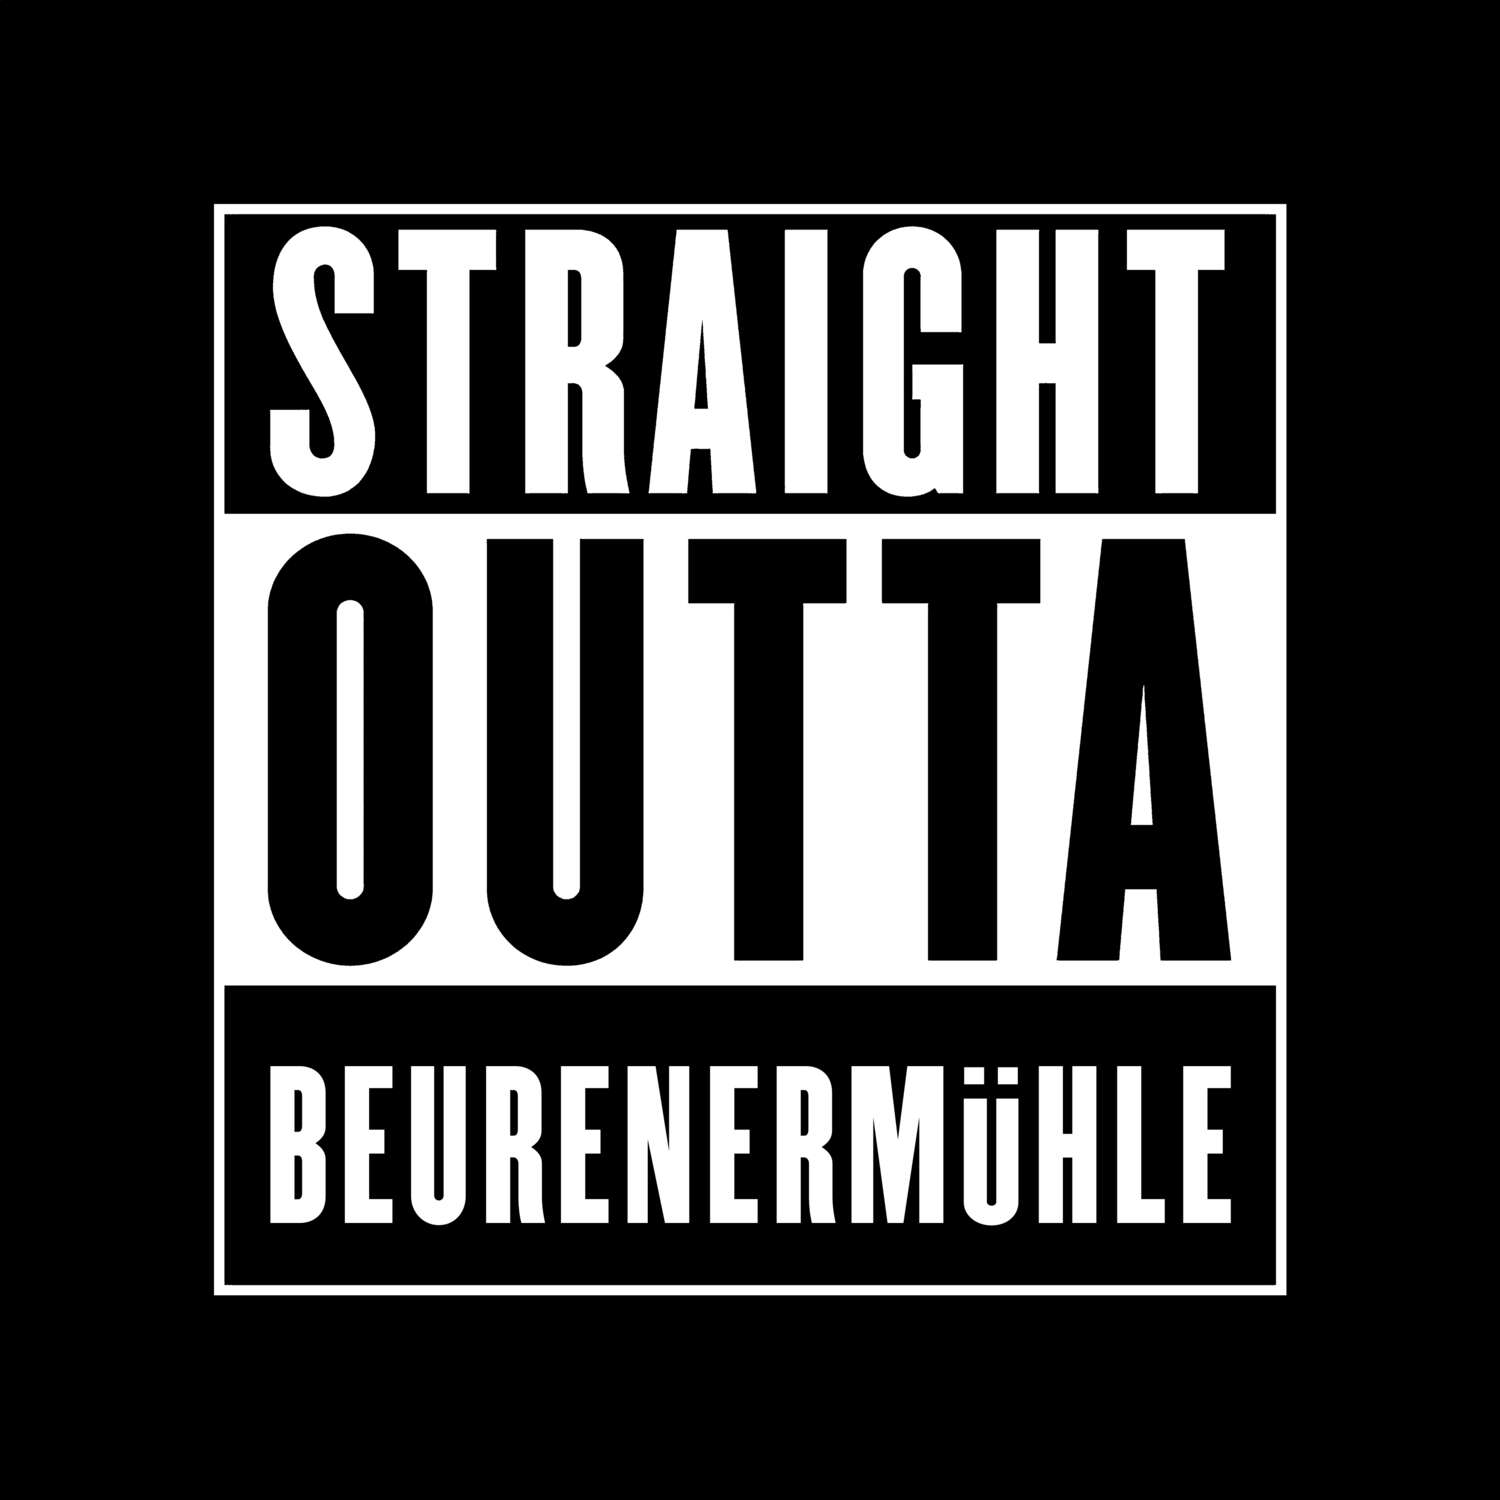 Beurenermühle T-Shirt »Straight Outta«